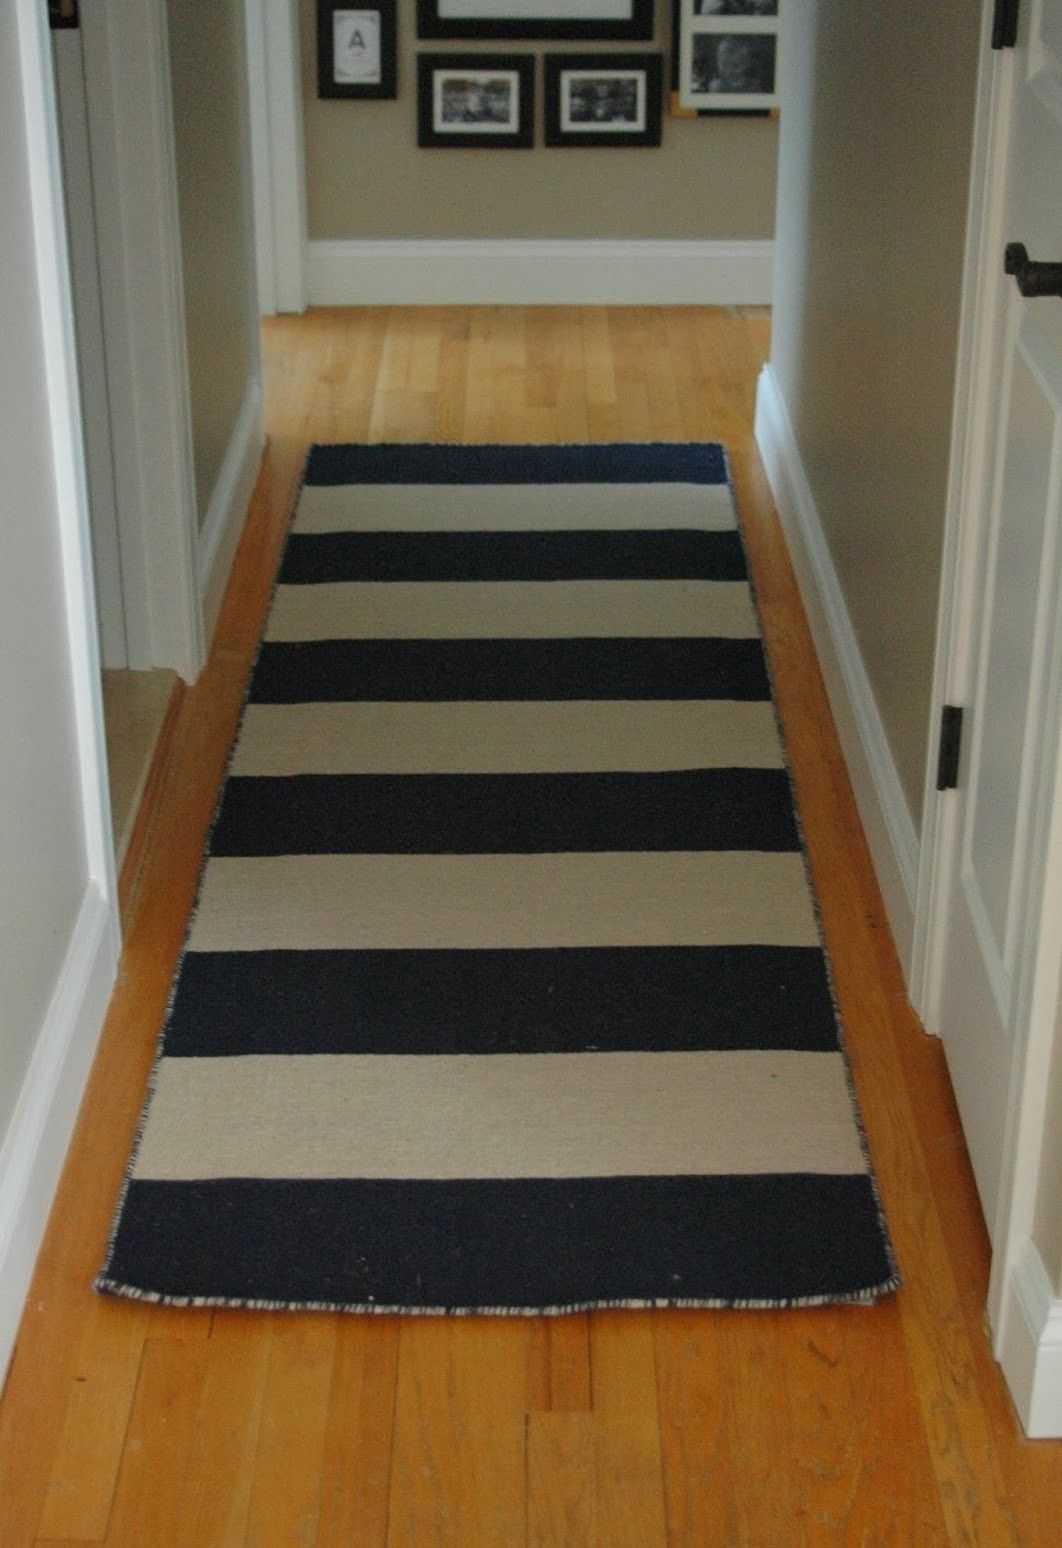 Black And White Striped Runner Rug Creative Rugs Decoration Intended For Hallway Runner Carpets (View 7 of 20)